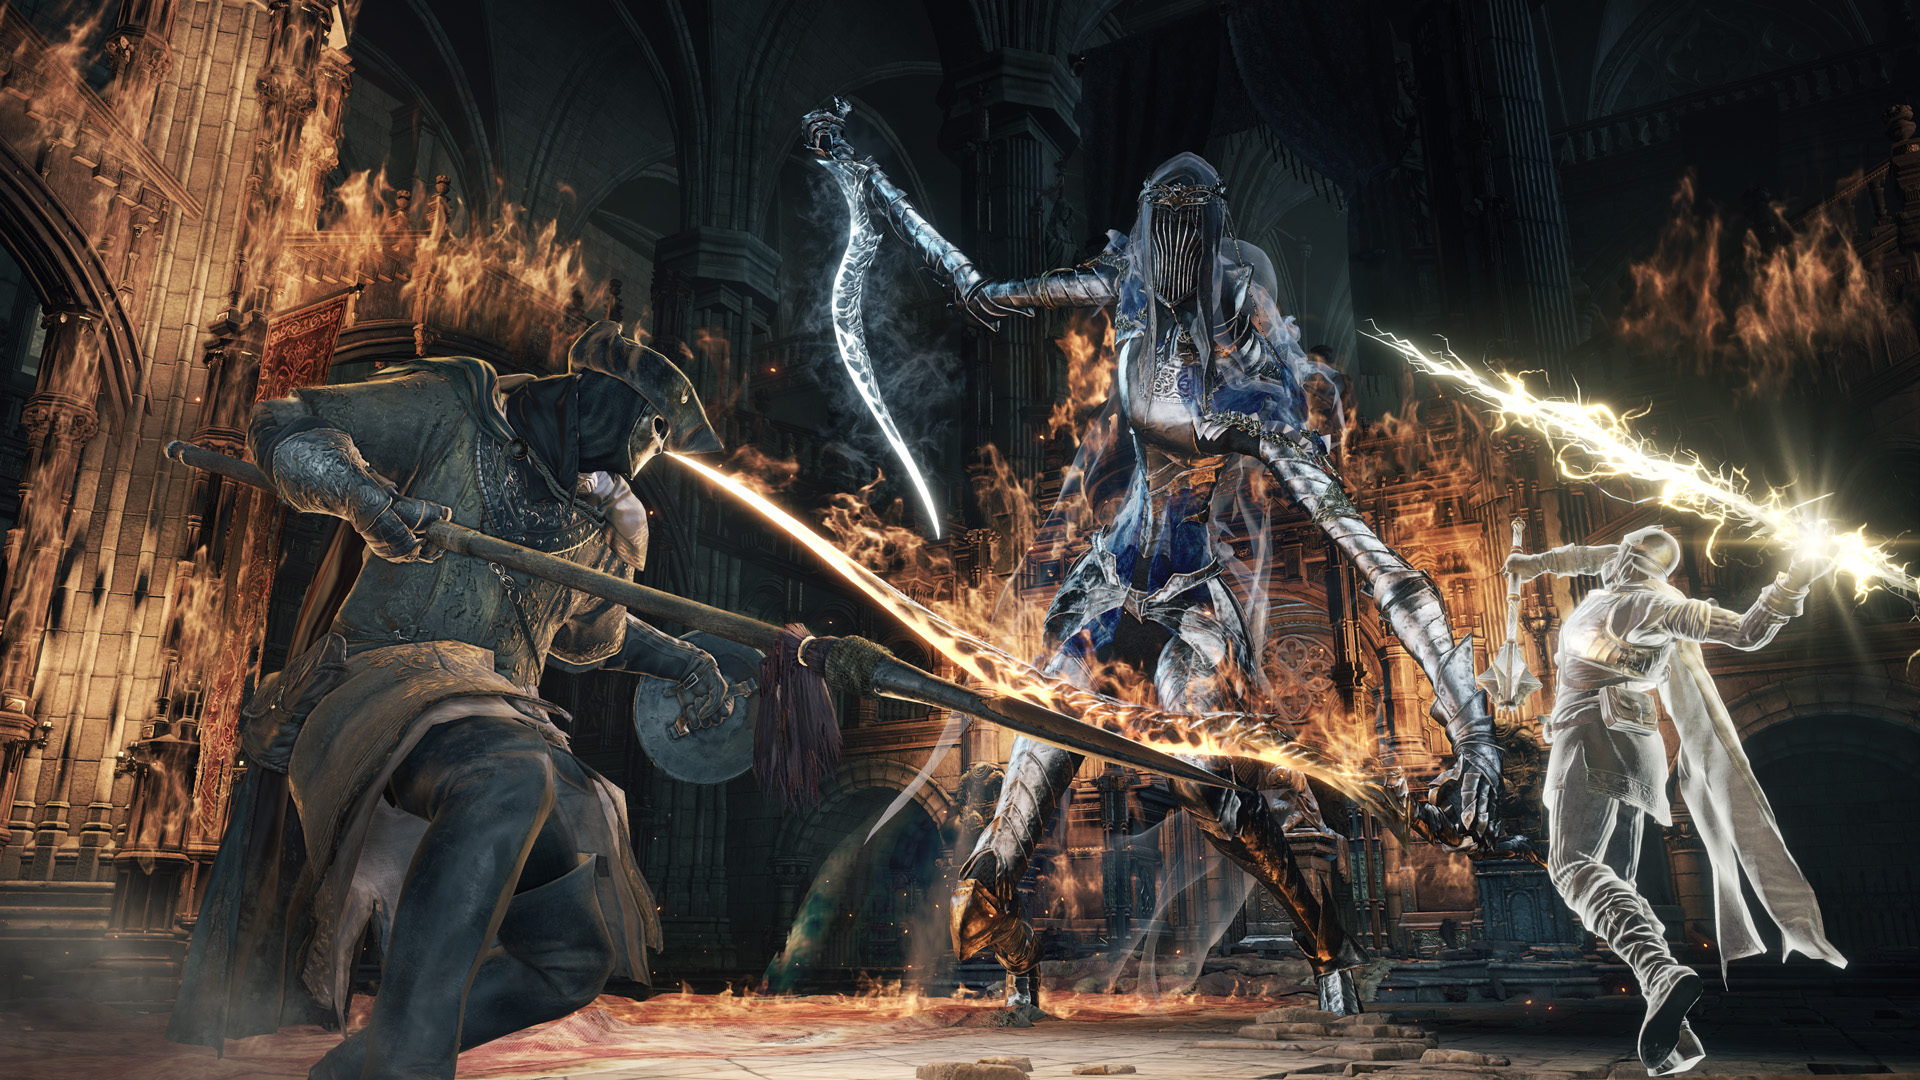 Dark Souls The Fire Fades Edition Playstation 4 Xbox One Windows 発売決定のお知らせ Pressrelease Fromsoftware